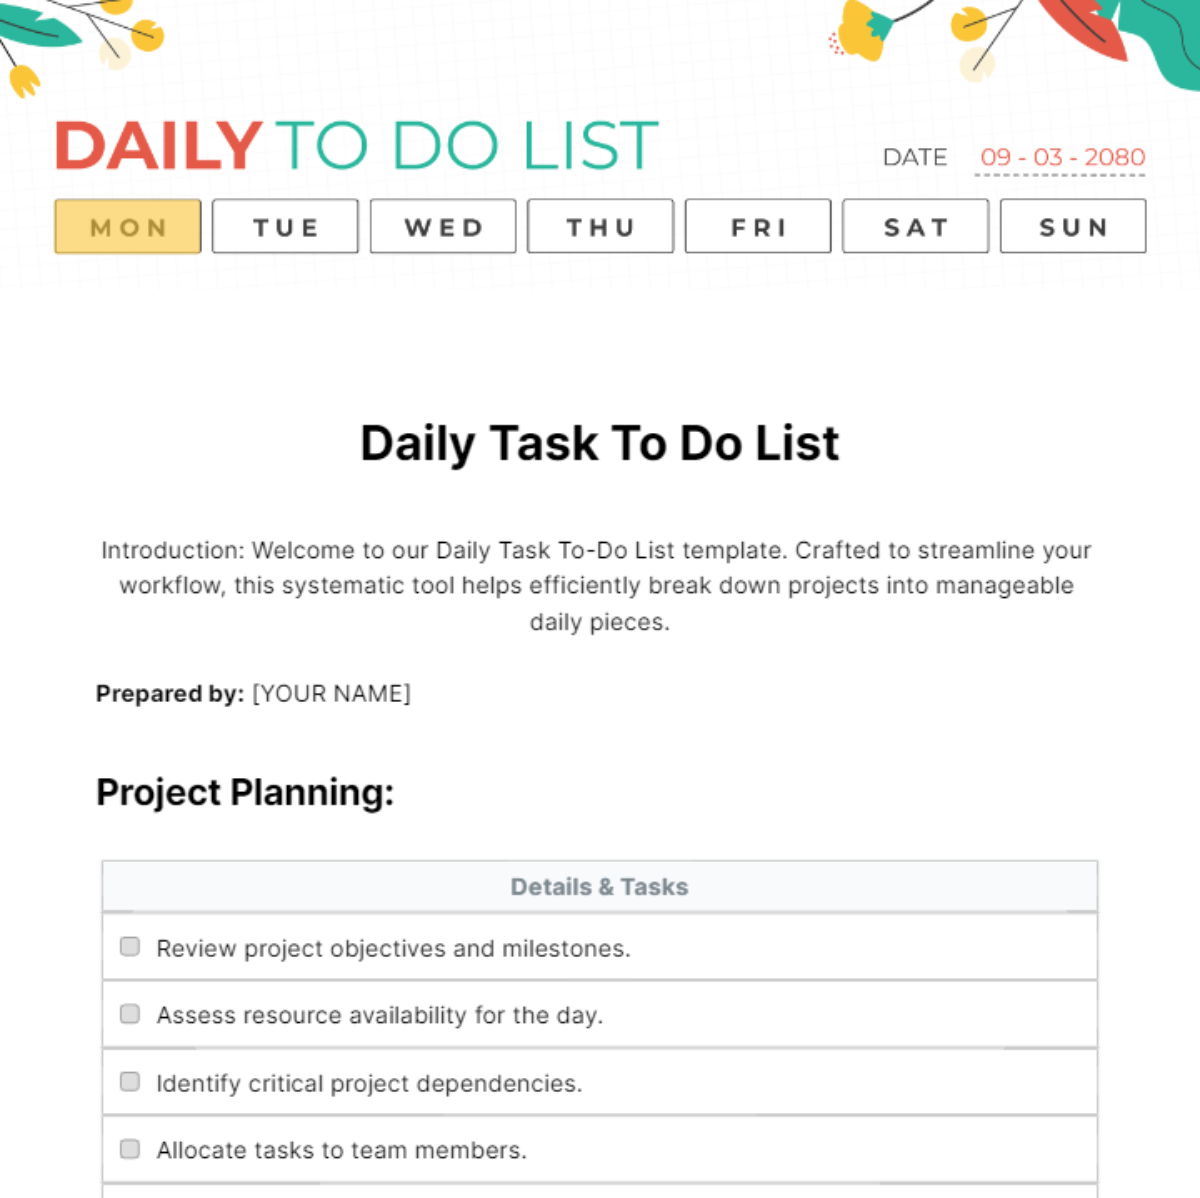 Daily Task To Do List Template